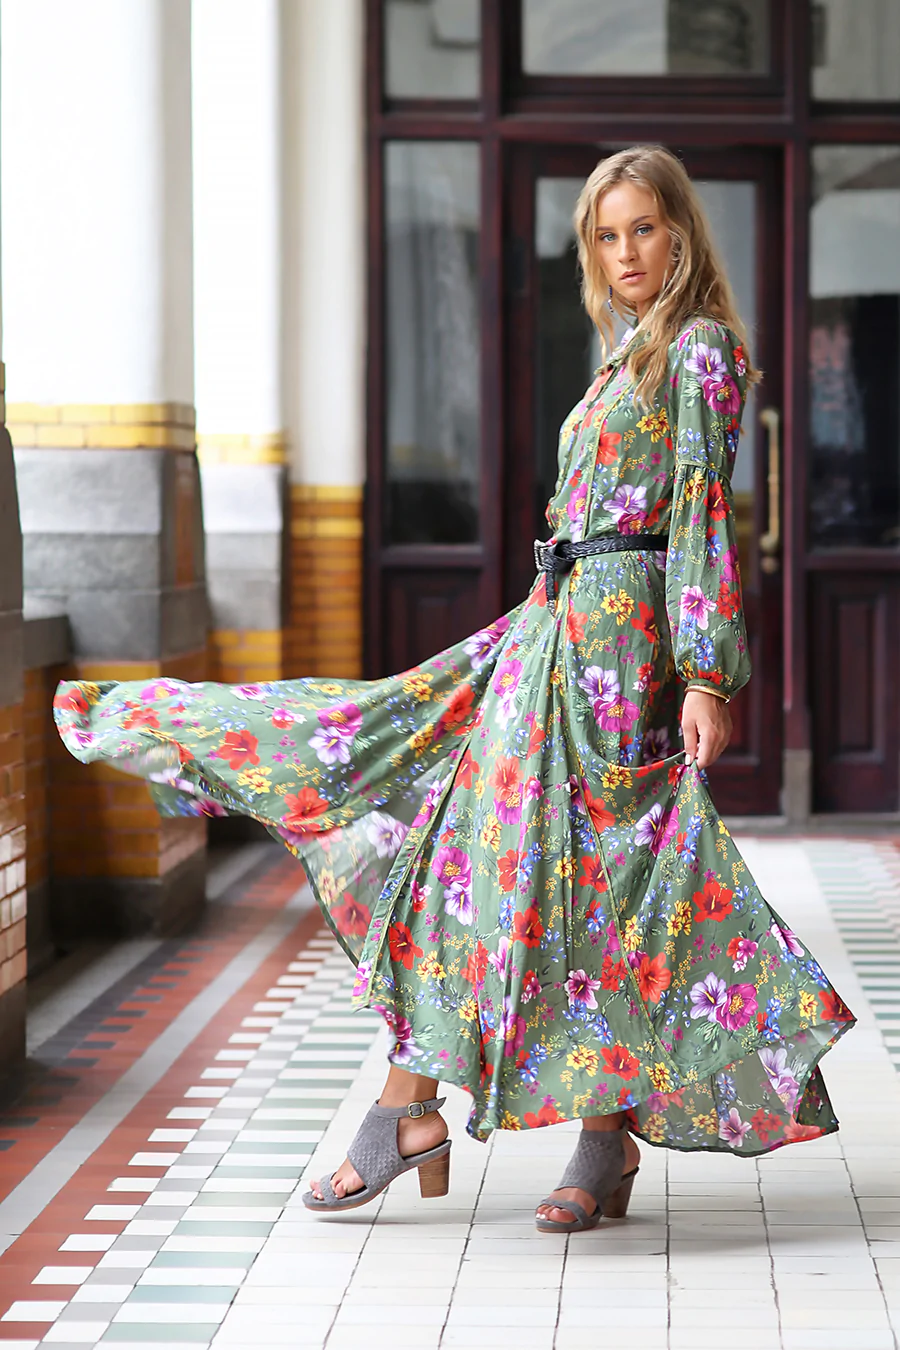 The Gypsy Queen Maxi Dress